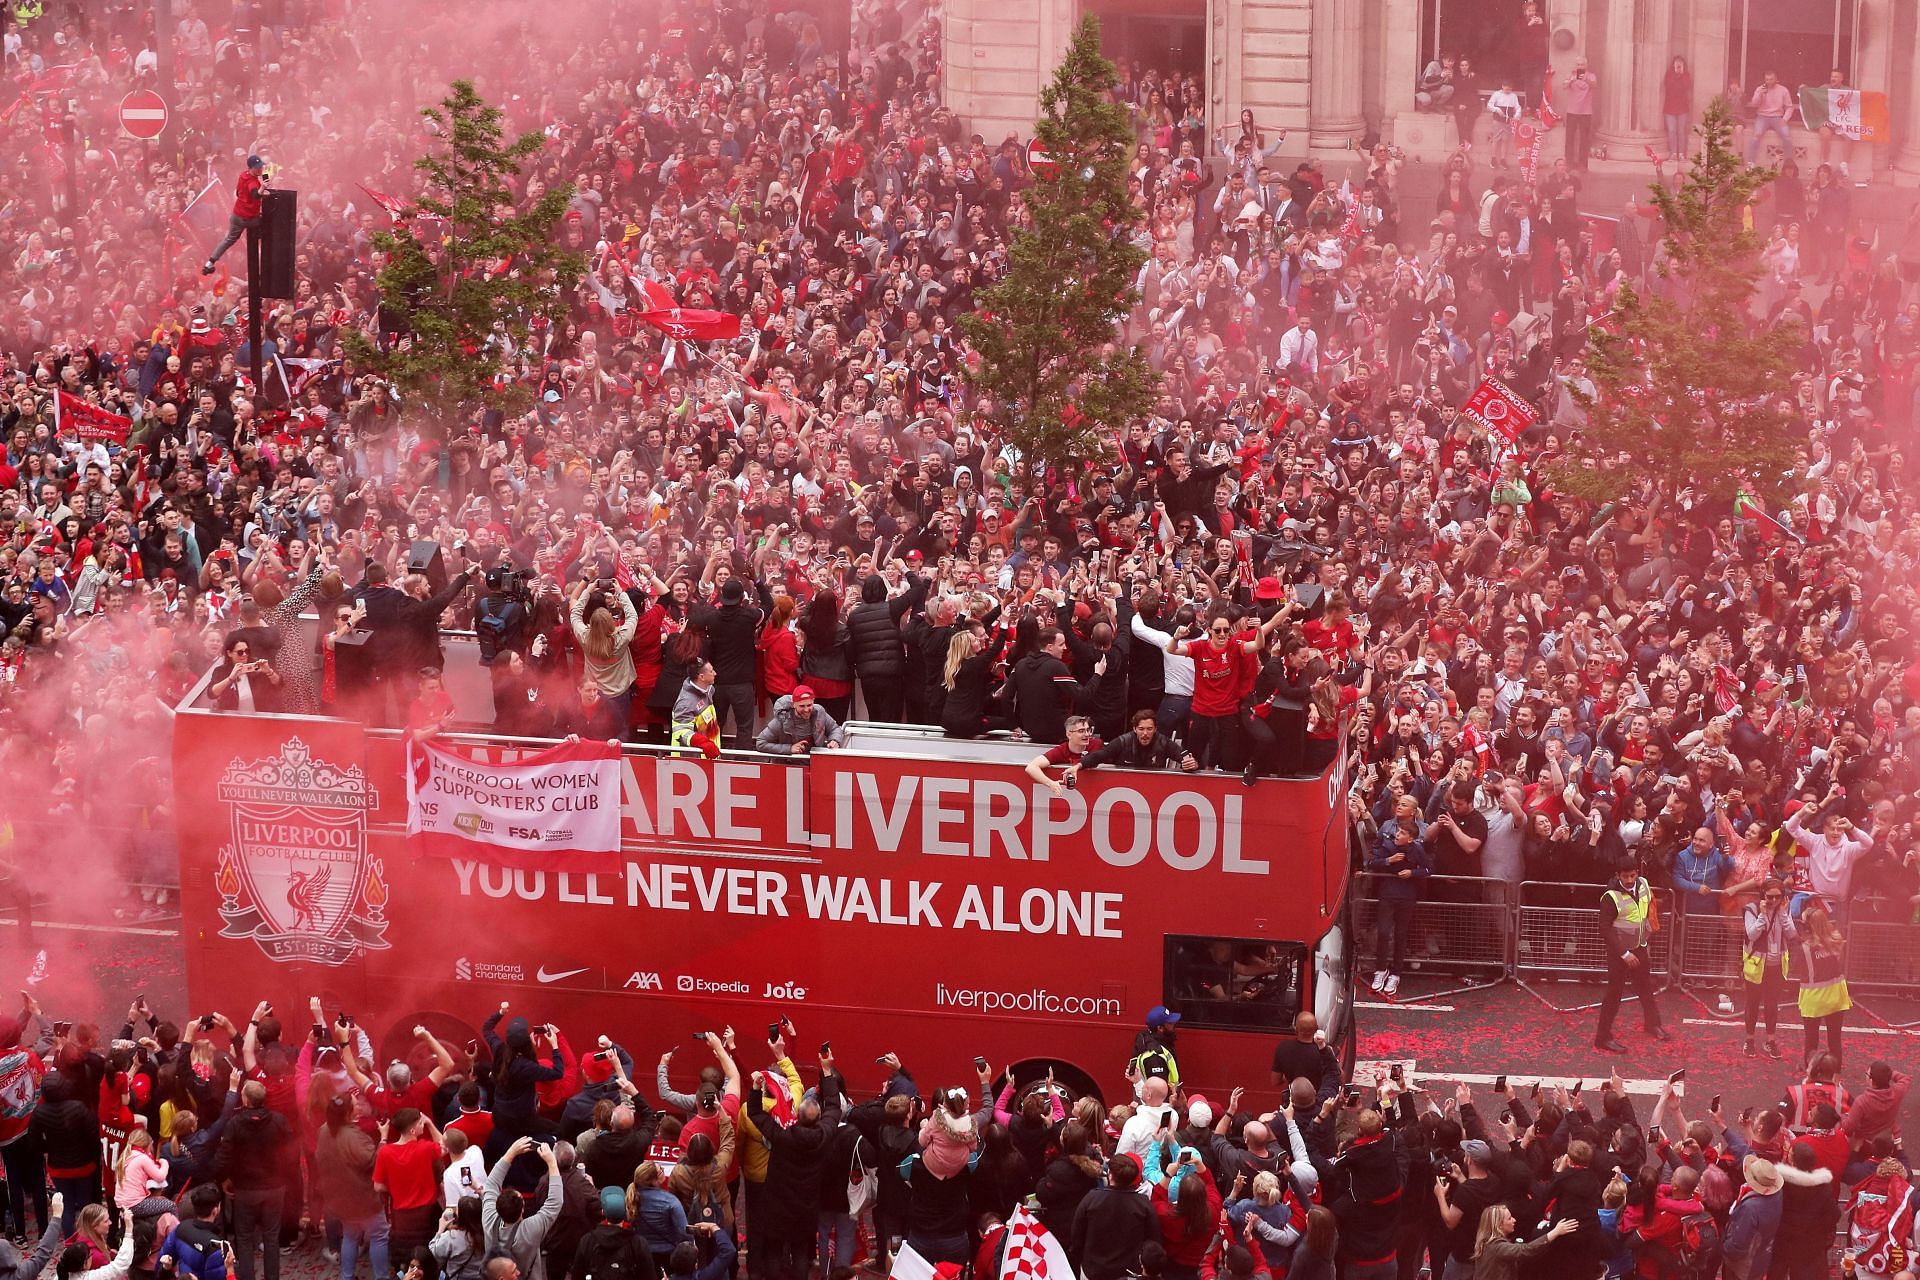 The Reds are one of the biggest clubs in the world